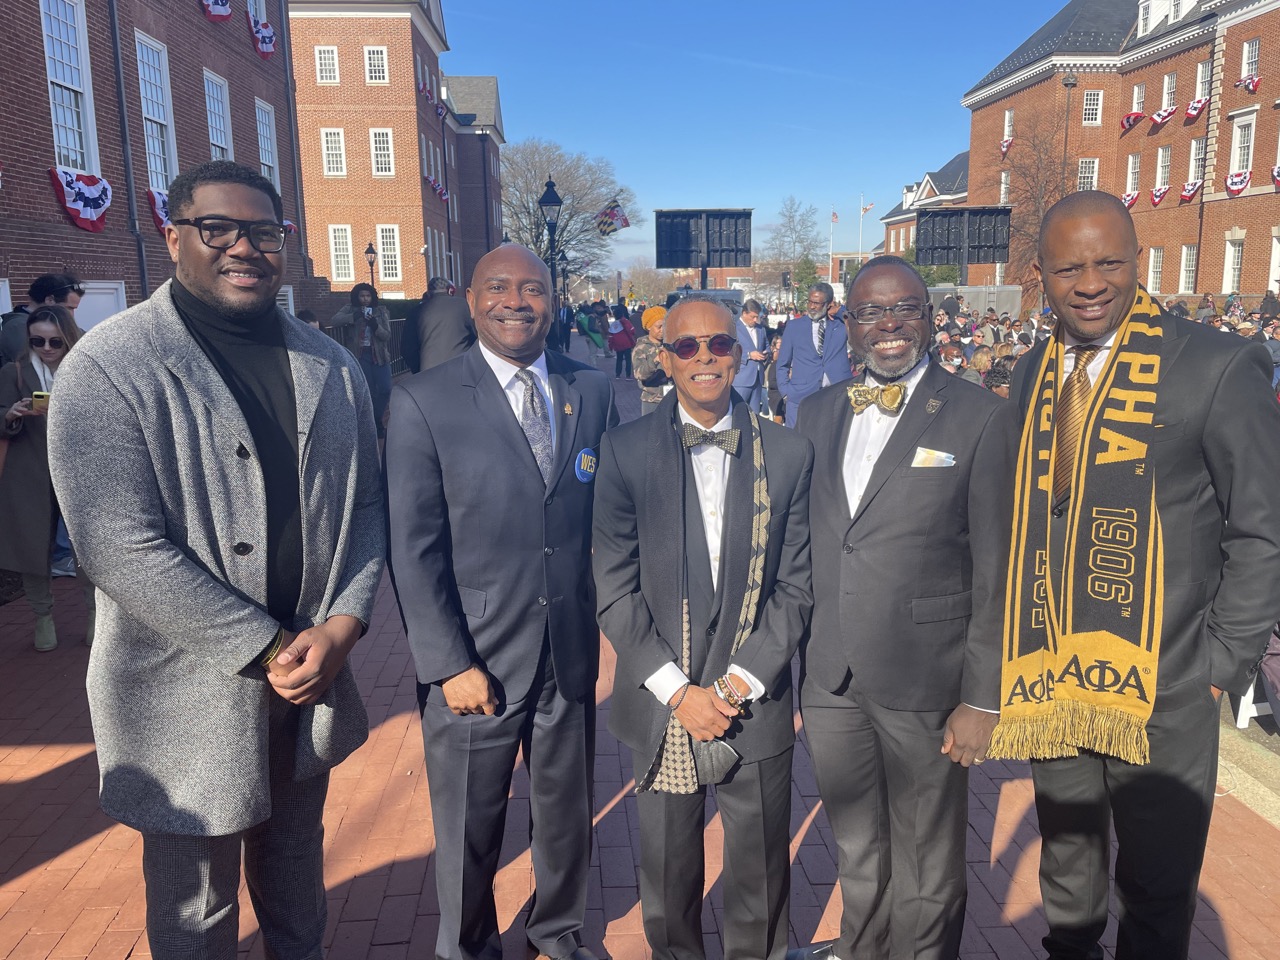 A multi-generational delegation of Alpha Phi Alpha fraternity members arriving to support new Maryland Governor and Alpha Wes Moore. From left to right: Jordan McKiinney, 19, Dr. Ralph Johnson, 63, Larry Davis, 63, Anton Deville, and Lucien Metellus, 47.